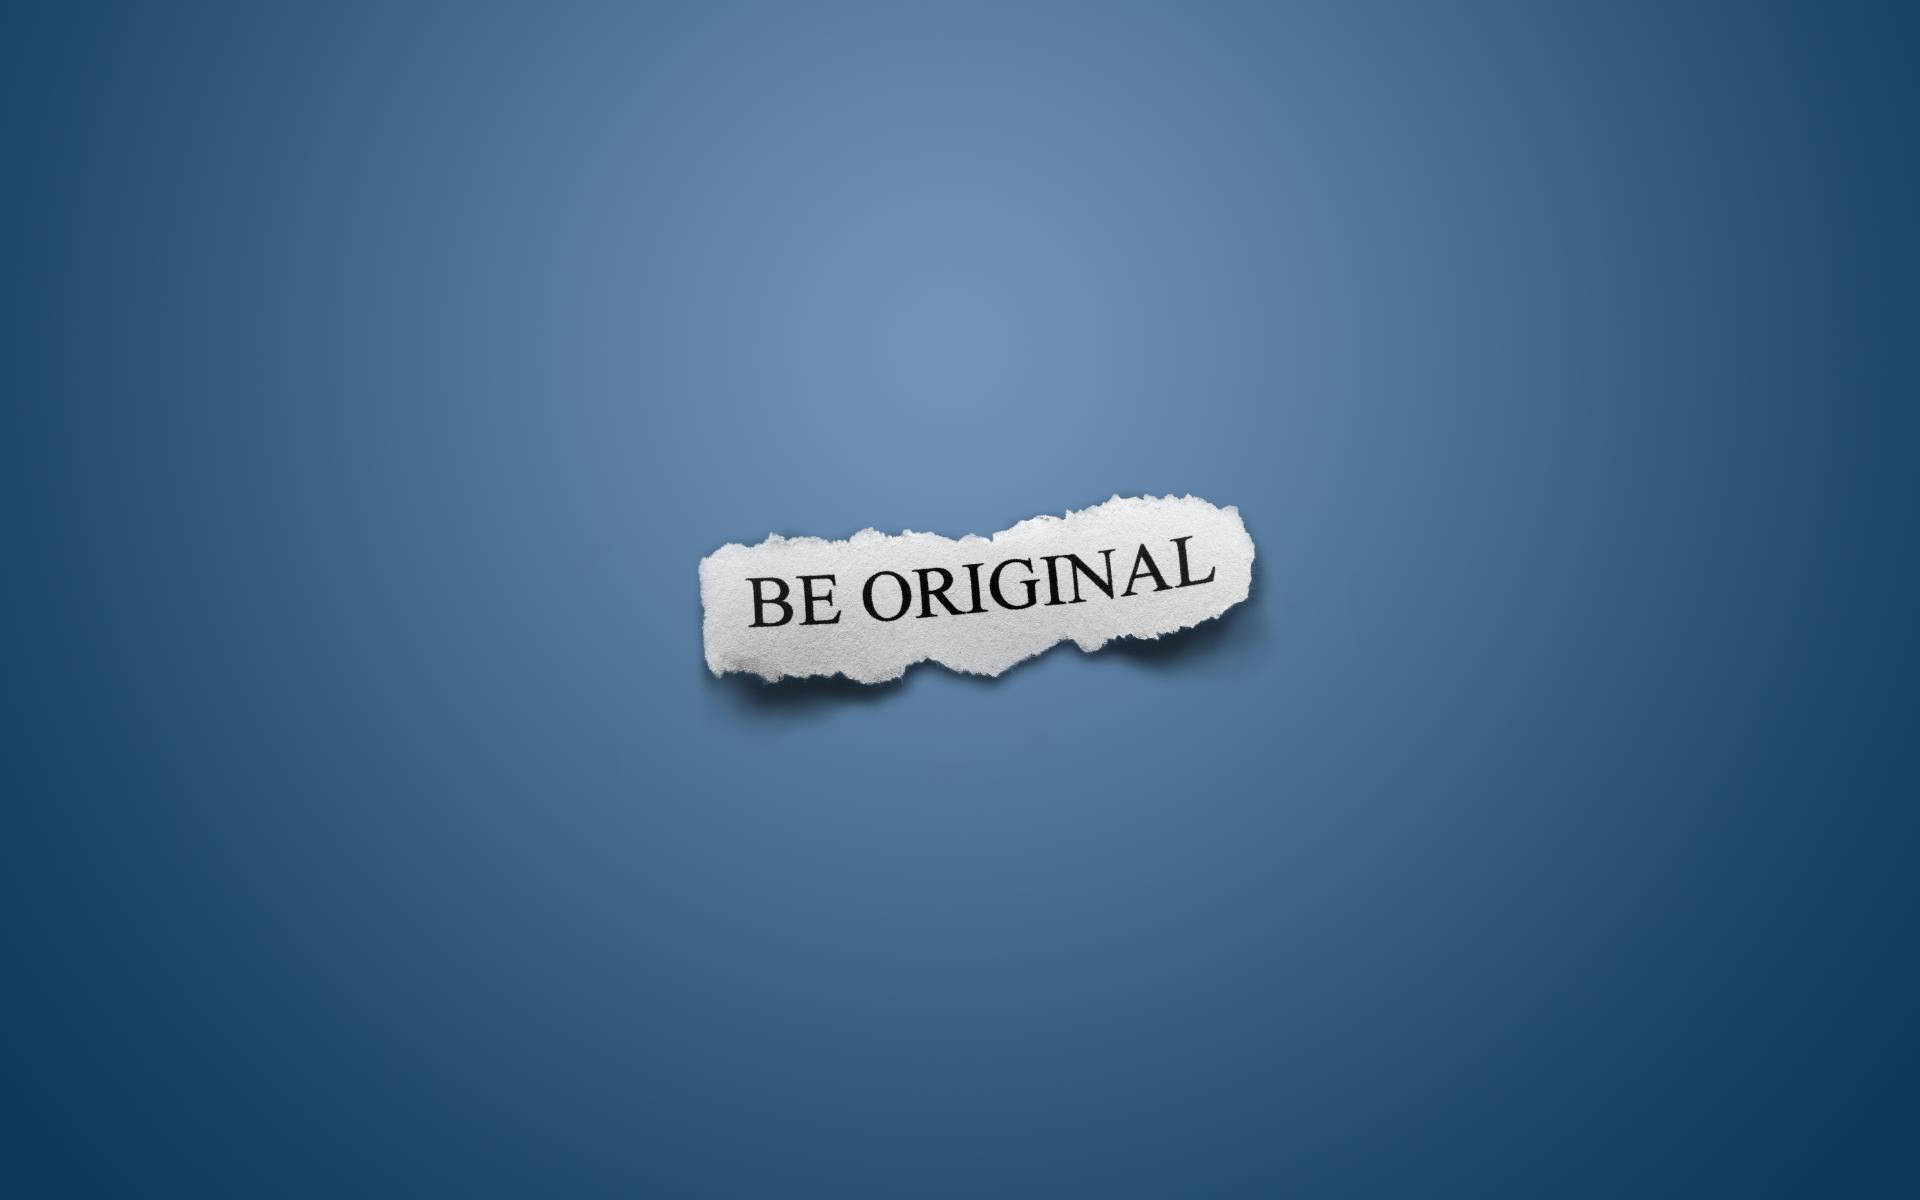 Be Original Motivational Quote Background